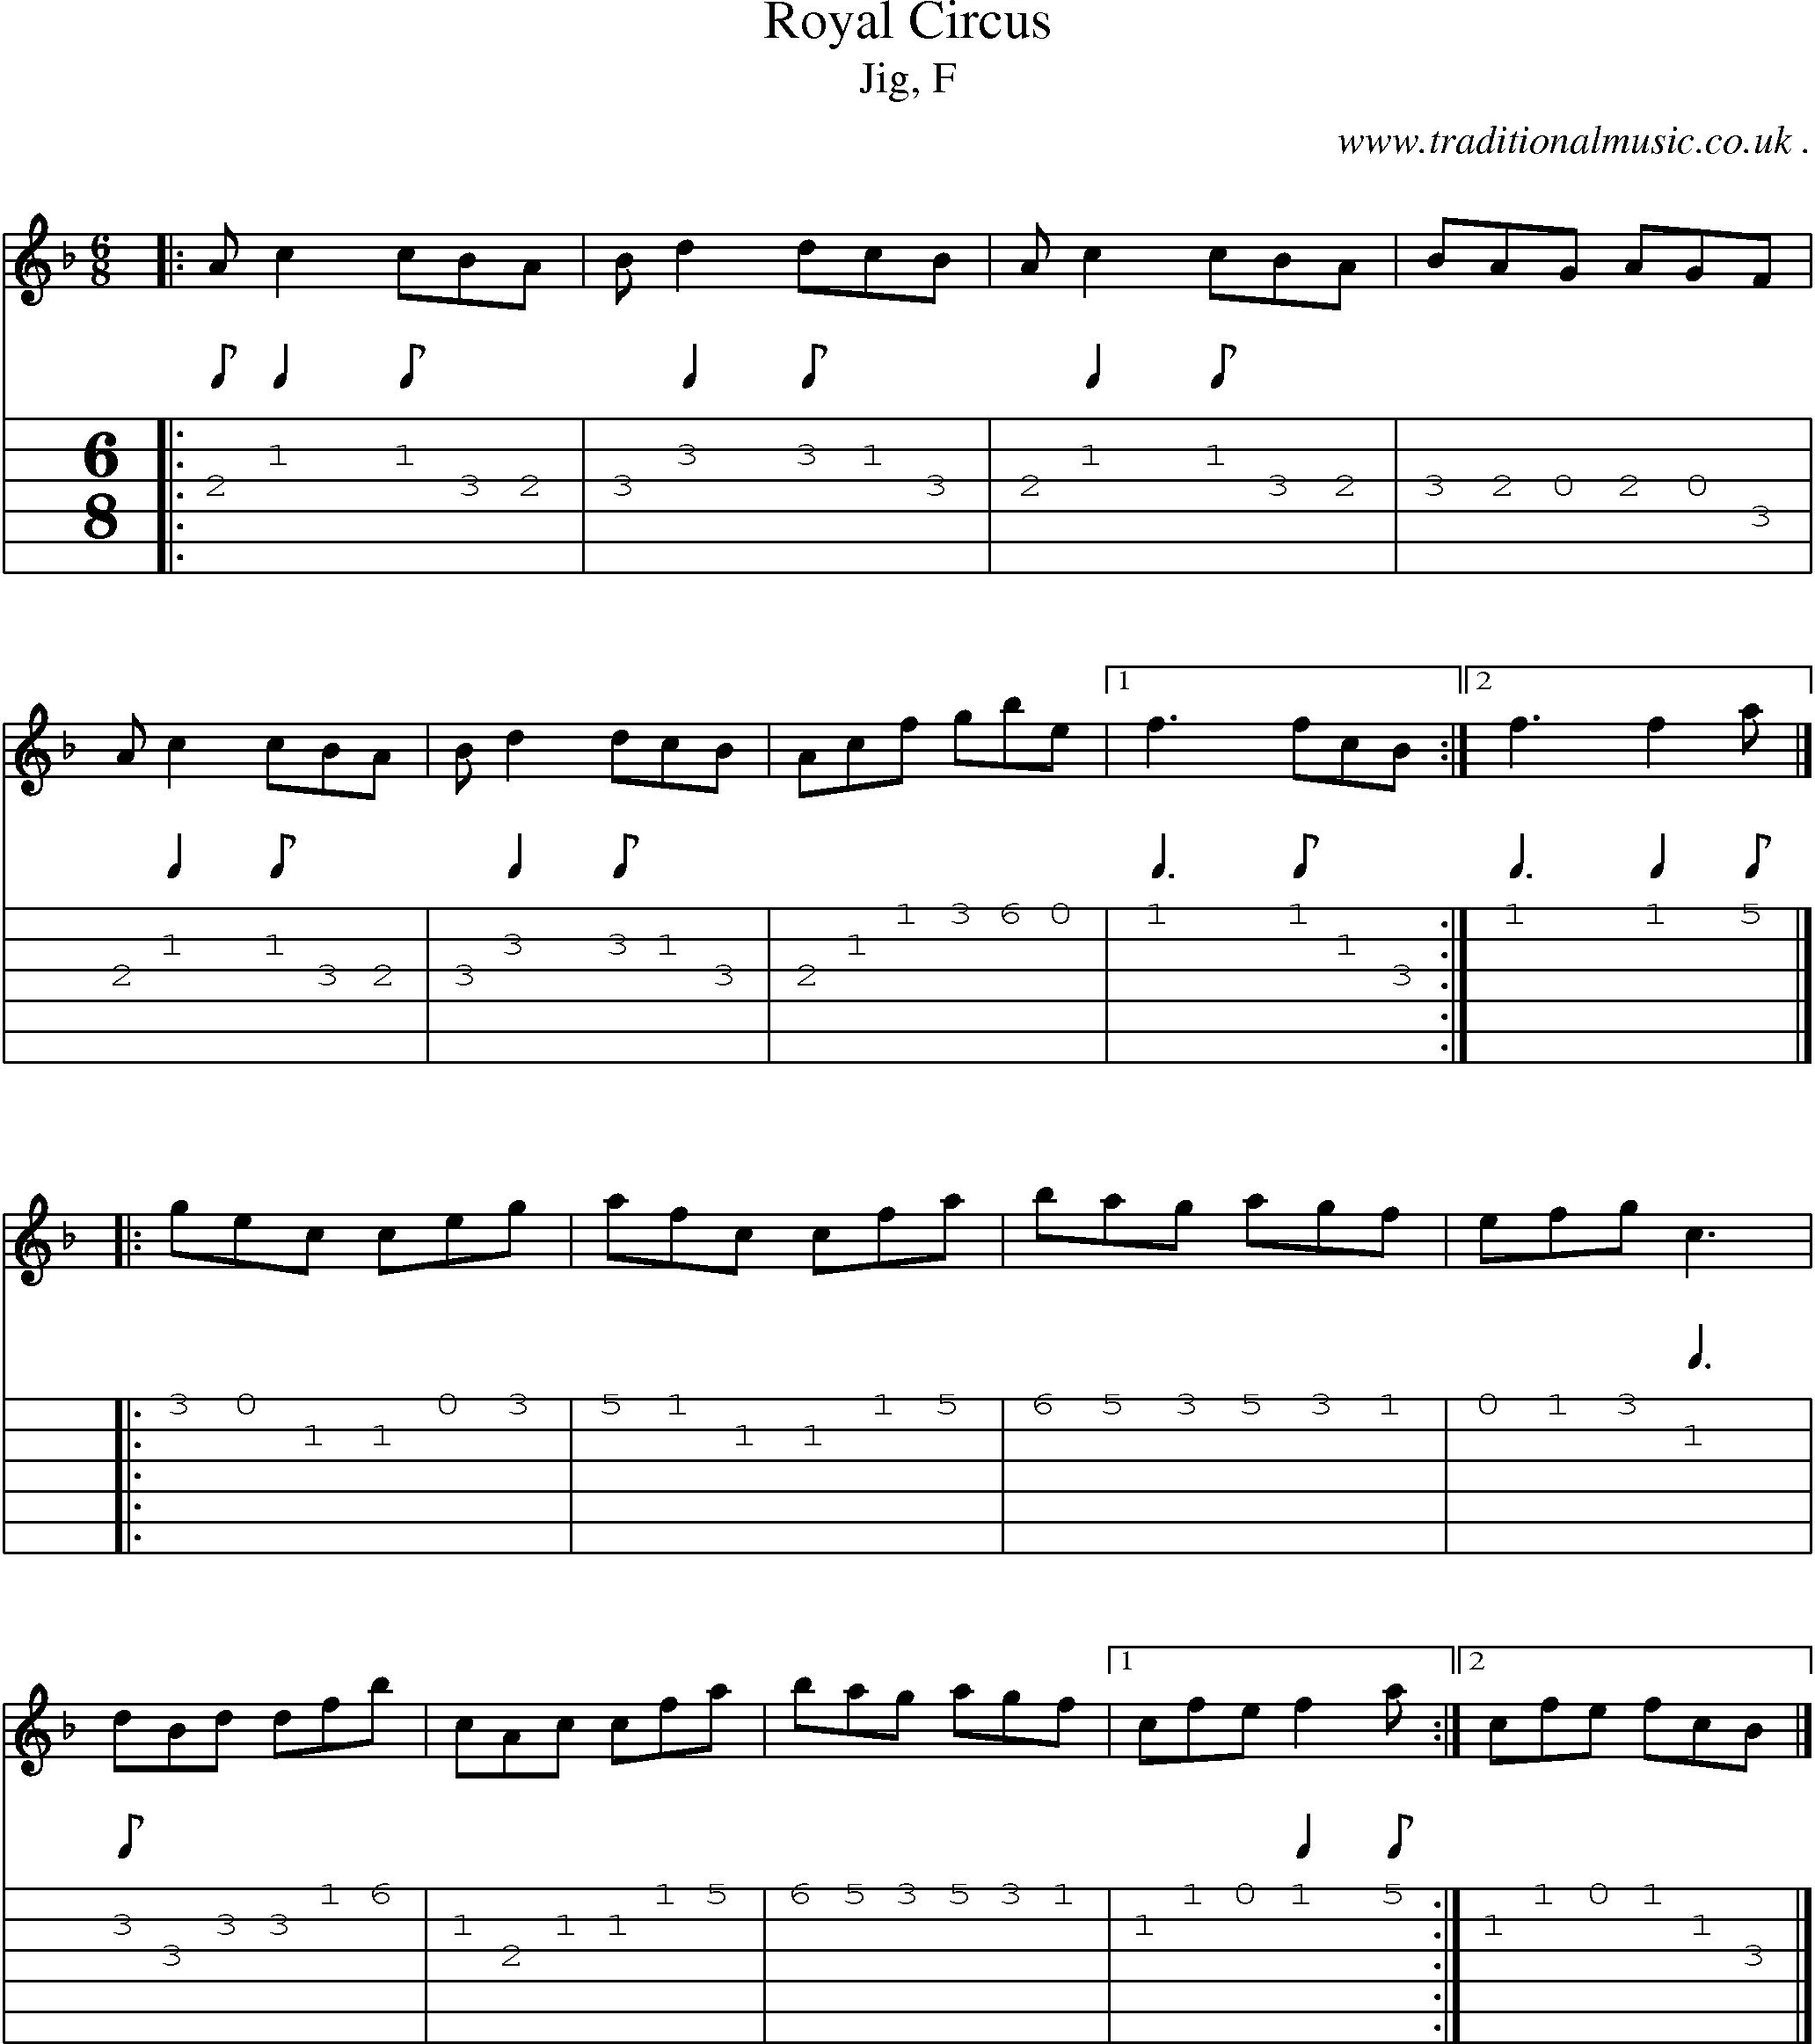 Sheet-music  score, Chords and Guitar Tabs for Royal Circus